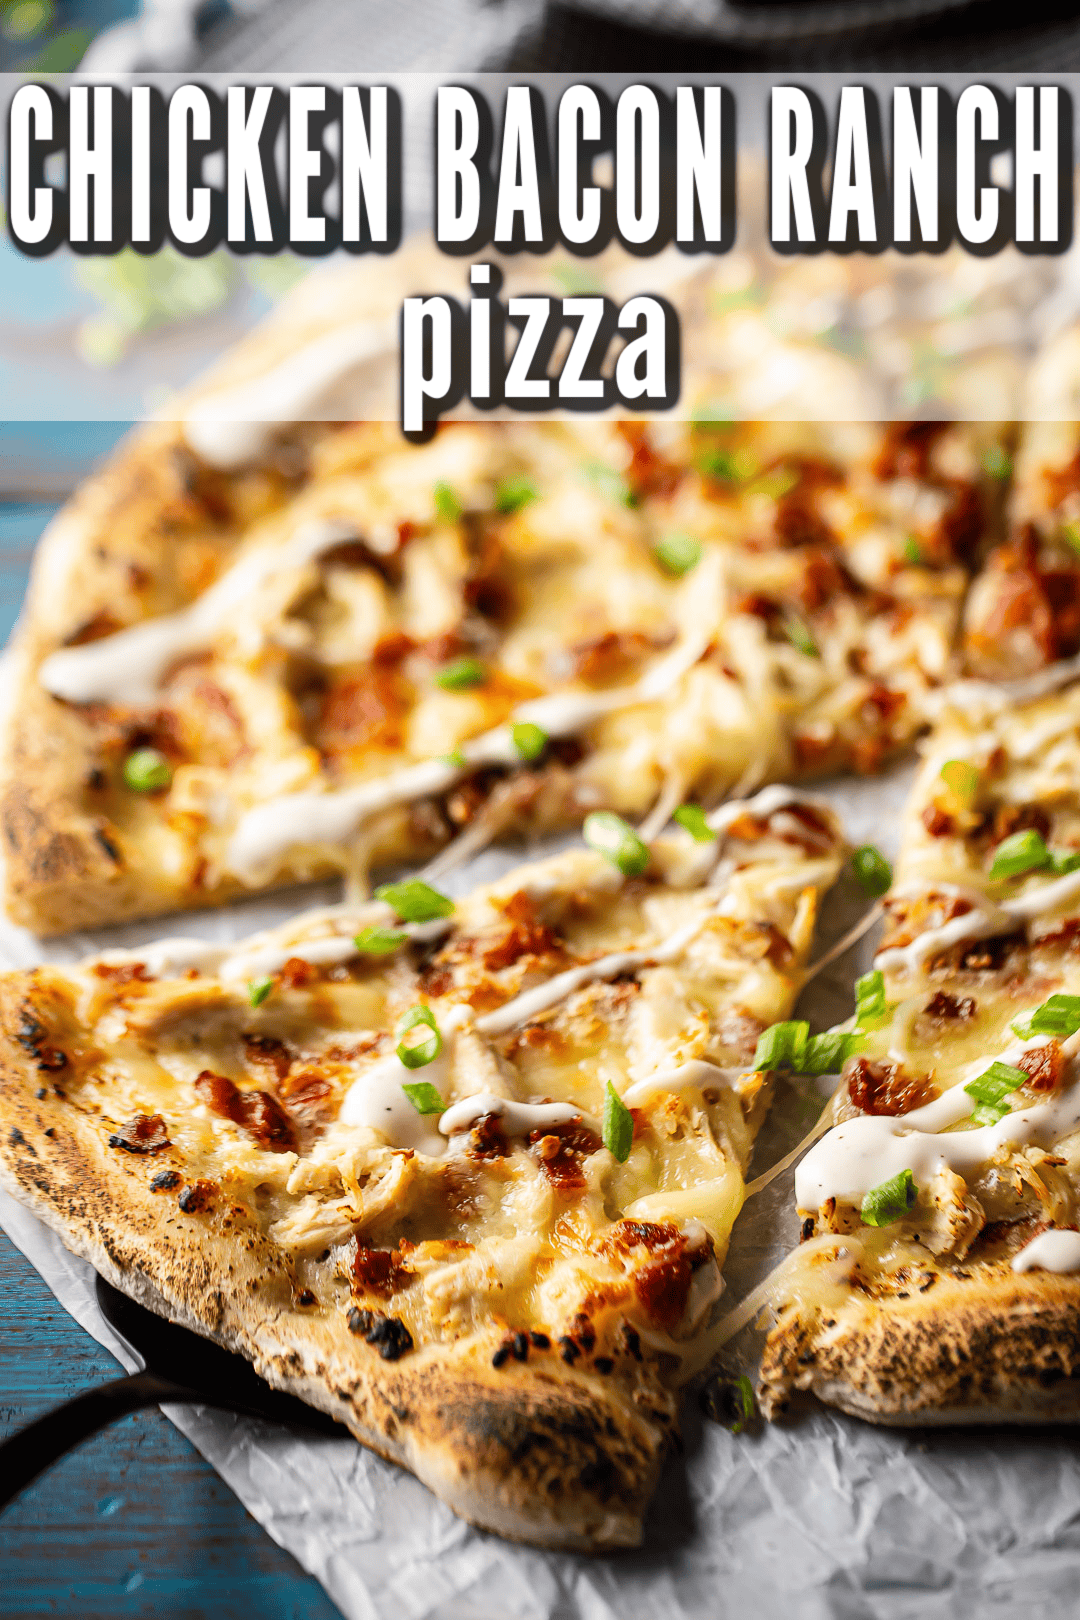 Chicken bacon ranch pizza recipe, prepared and garnished with sliced green onions.